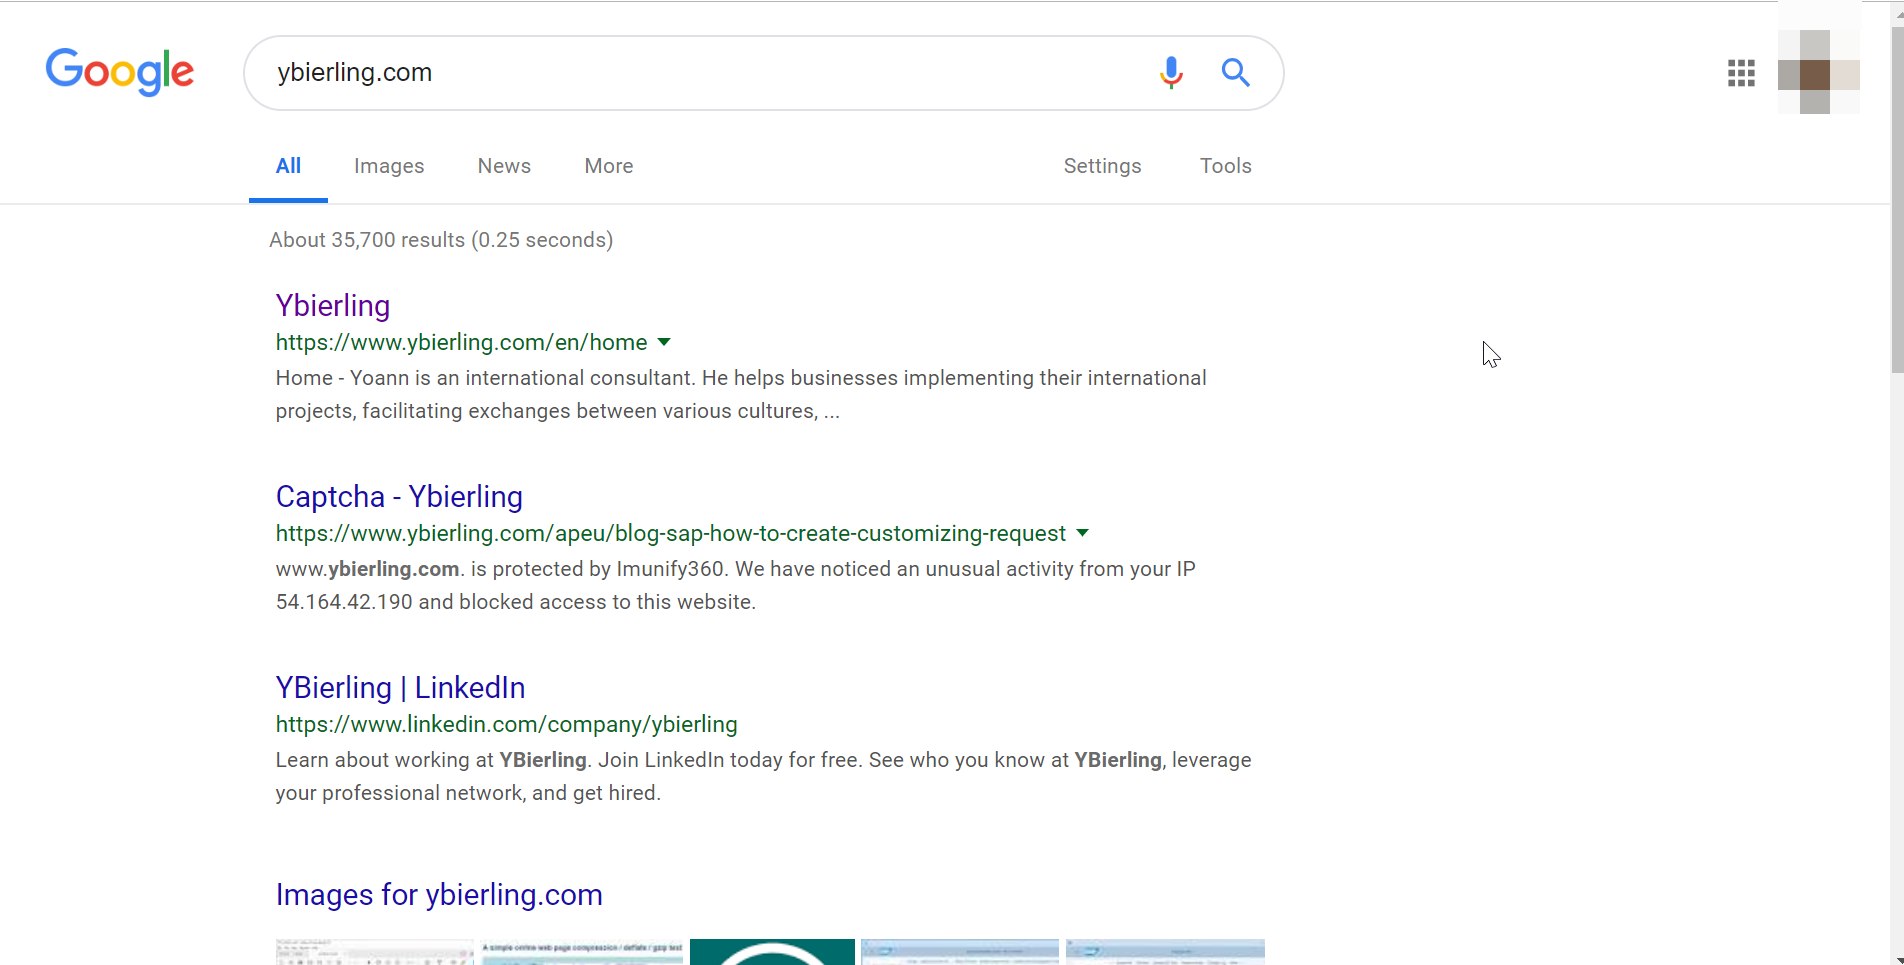 How to change language in Google?